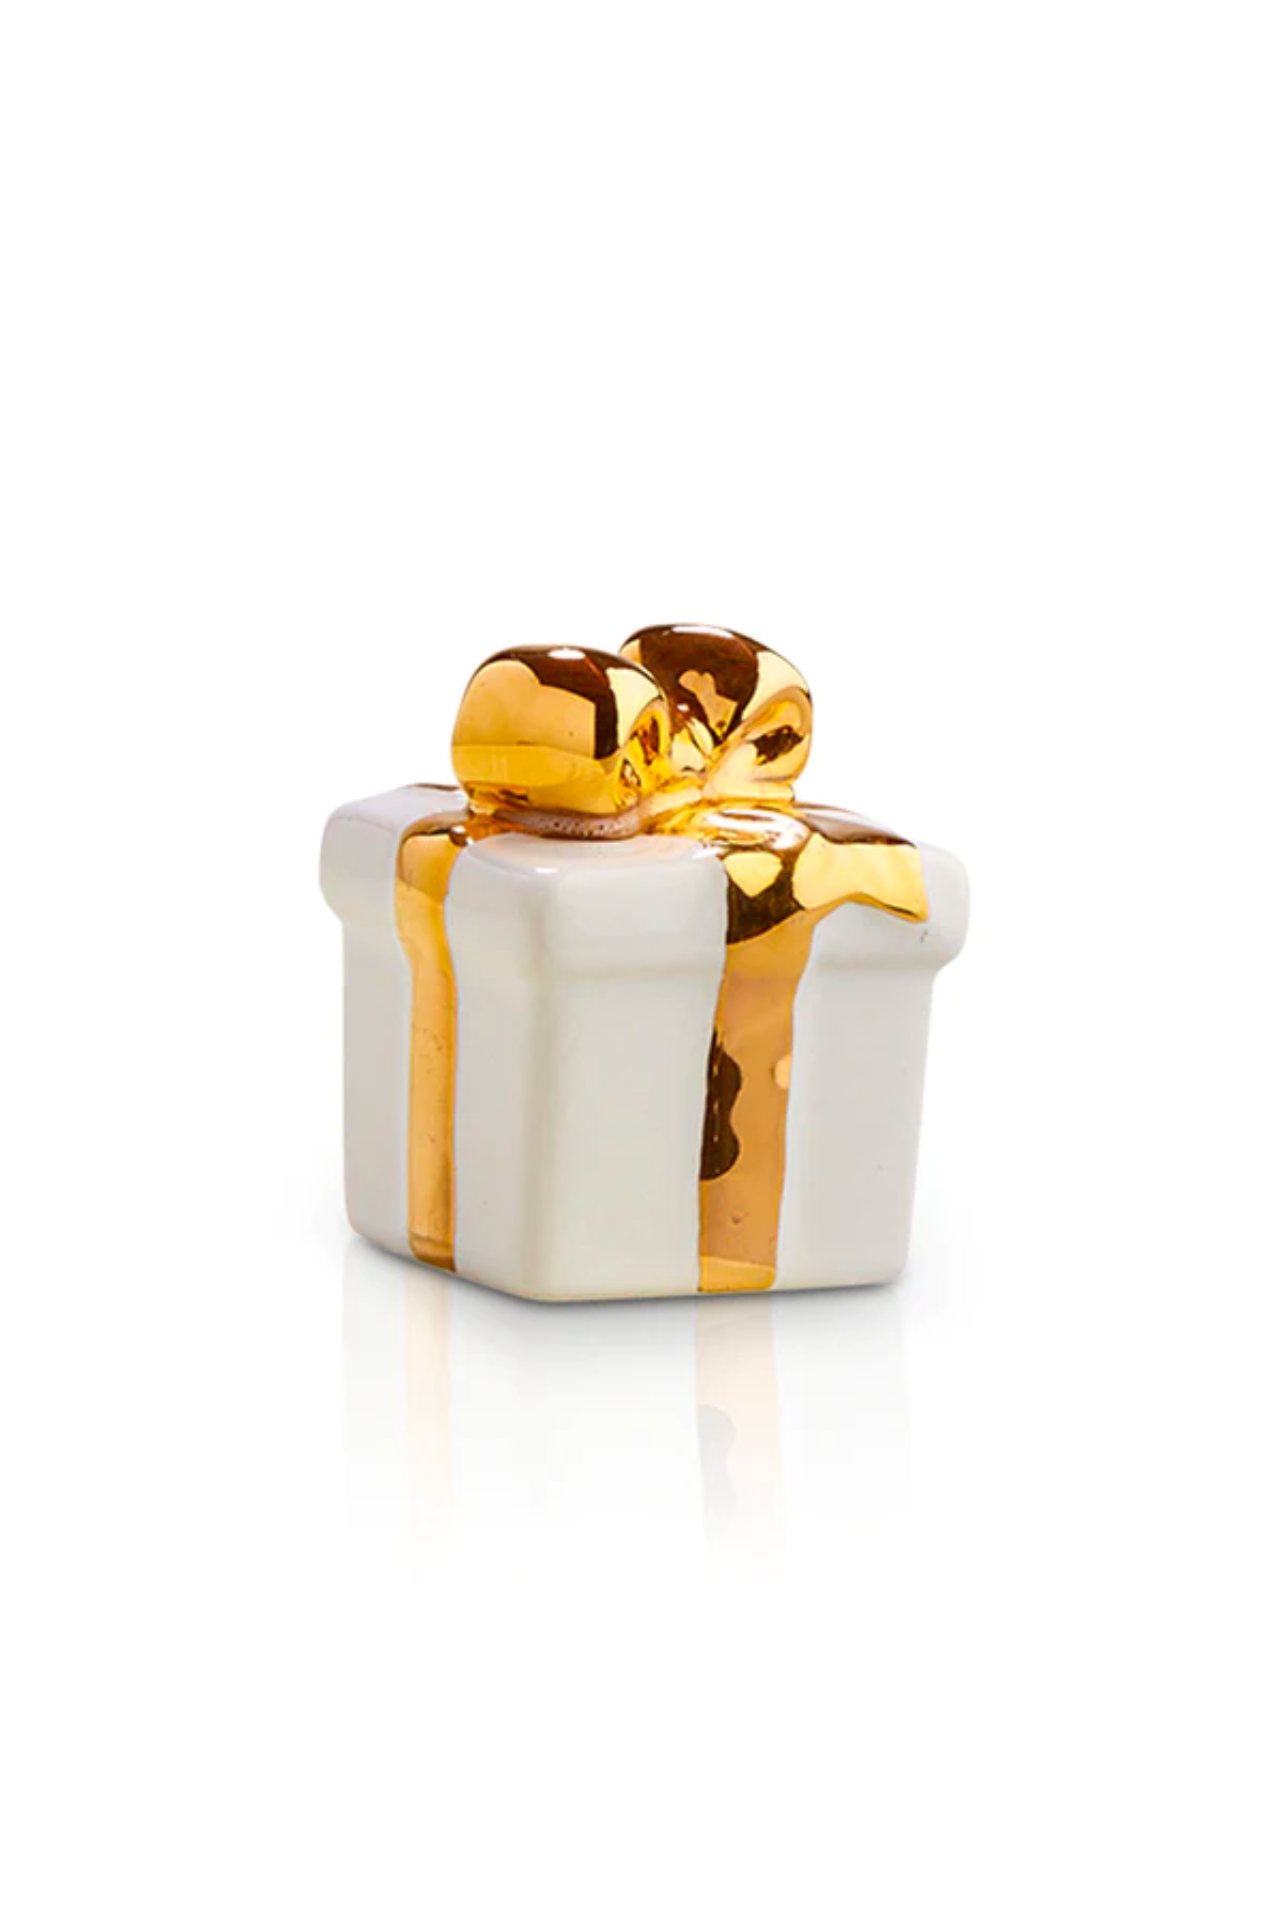 golden wishes (white gift) A185